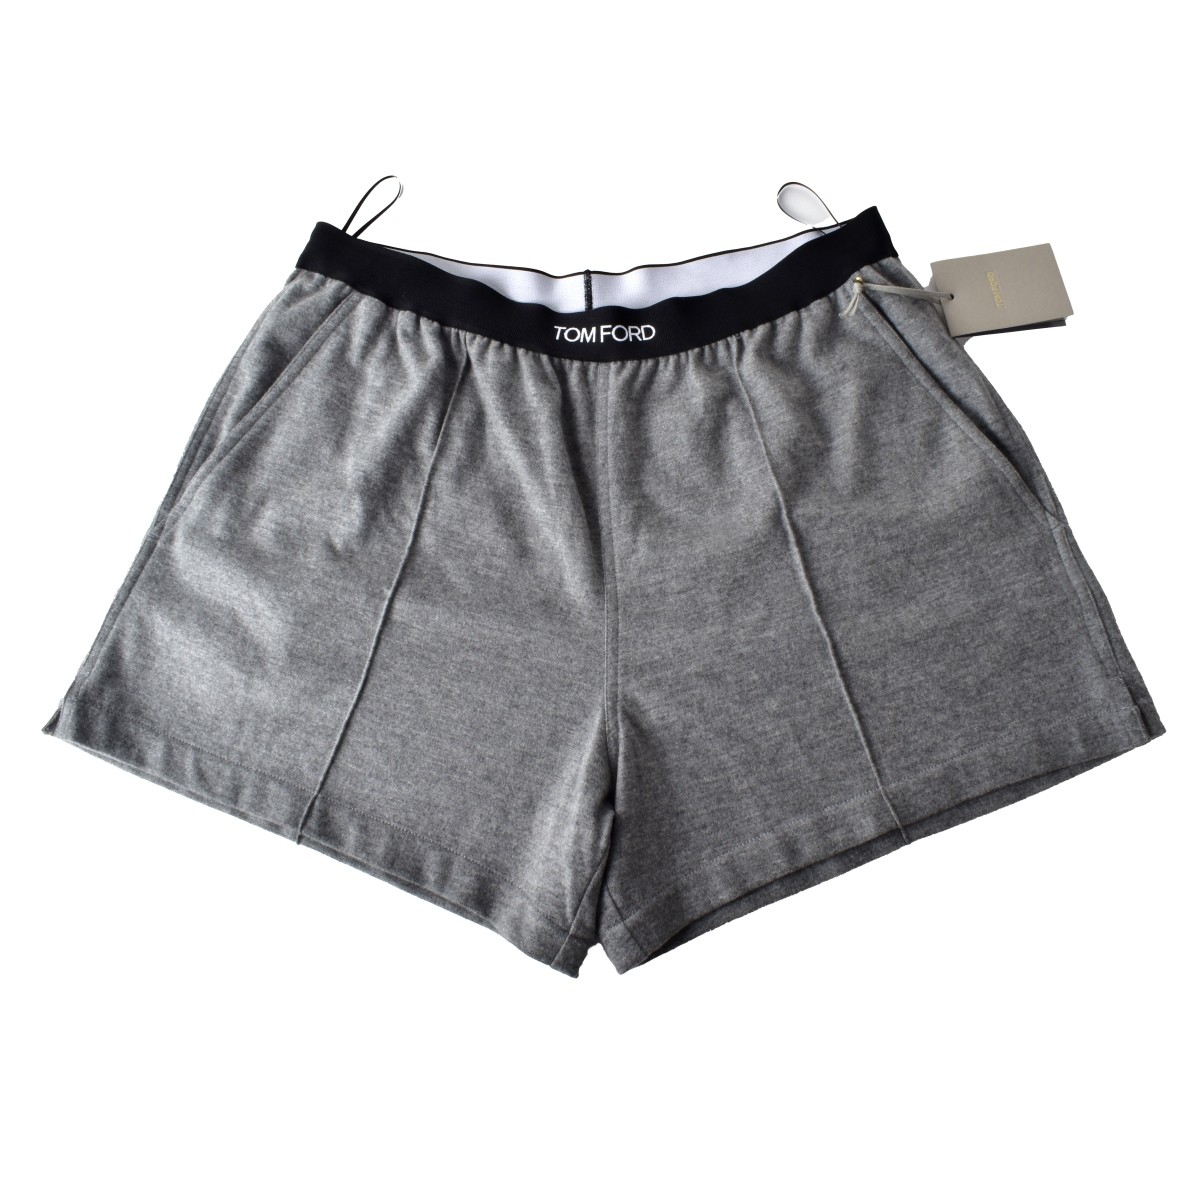 Tom Ford Grey and White Shorts | Kodner Auctions